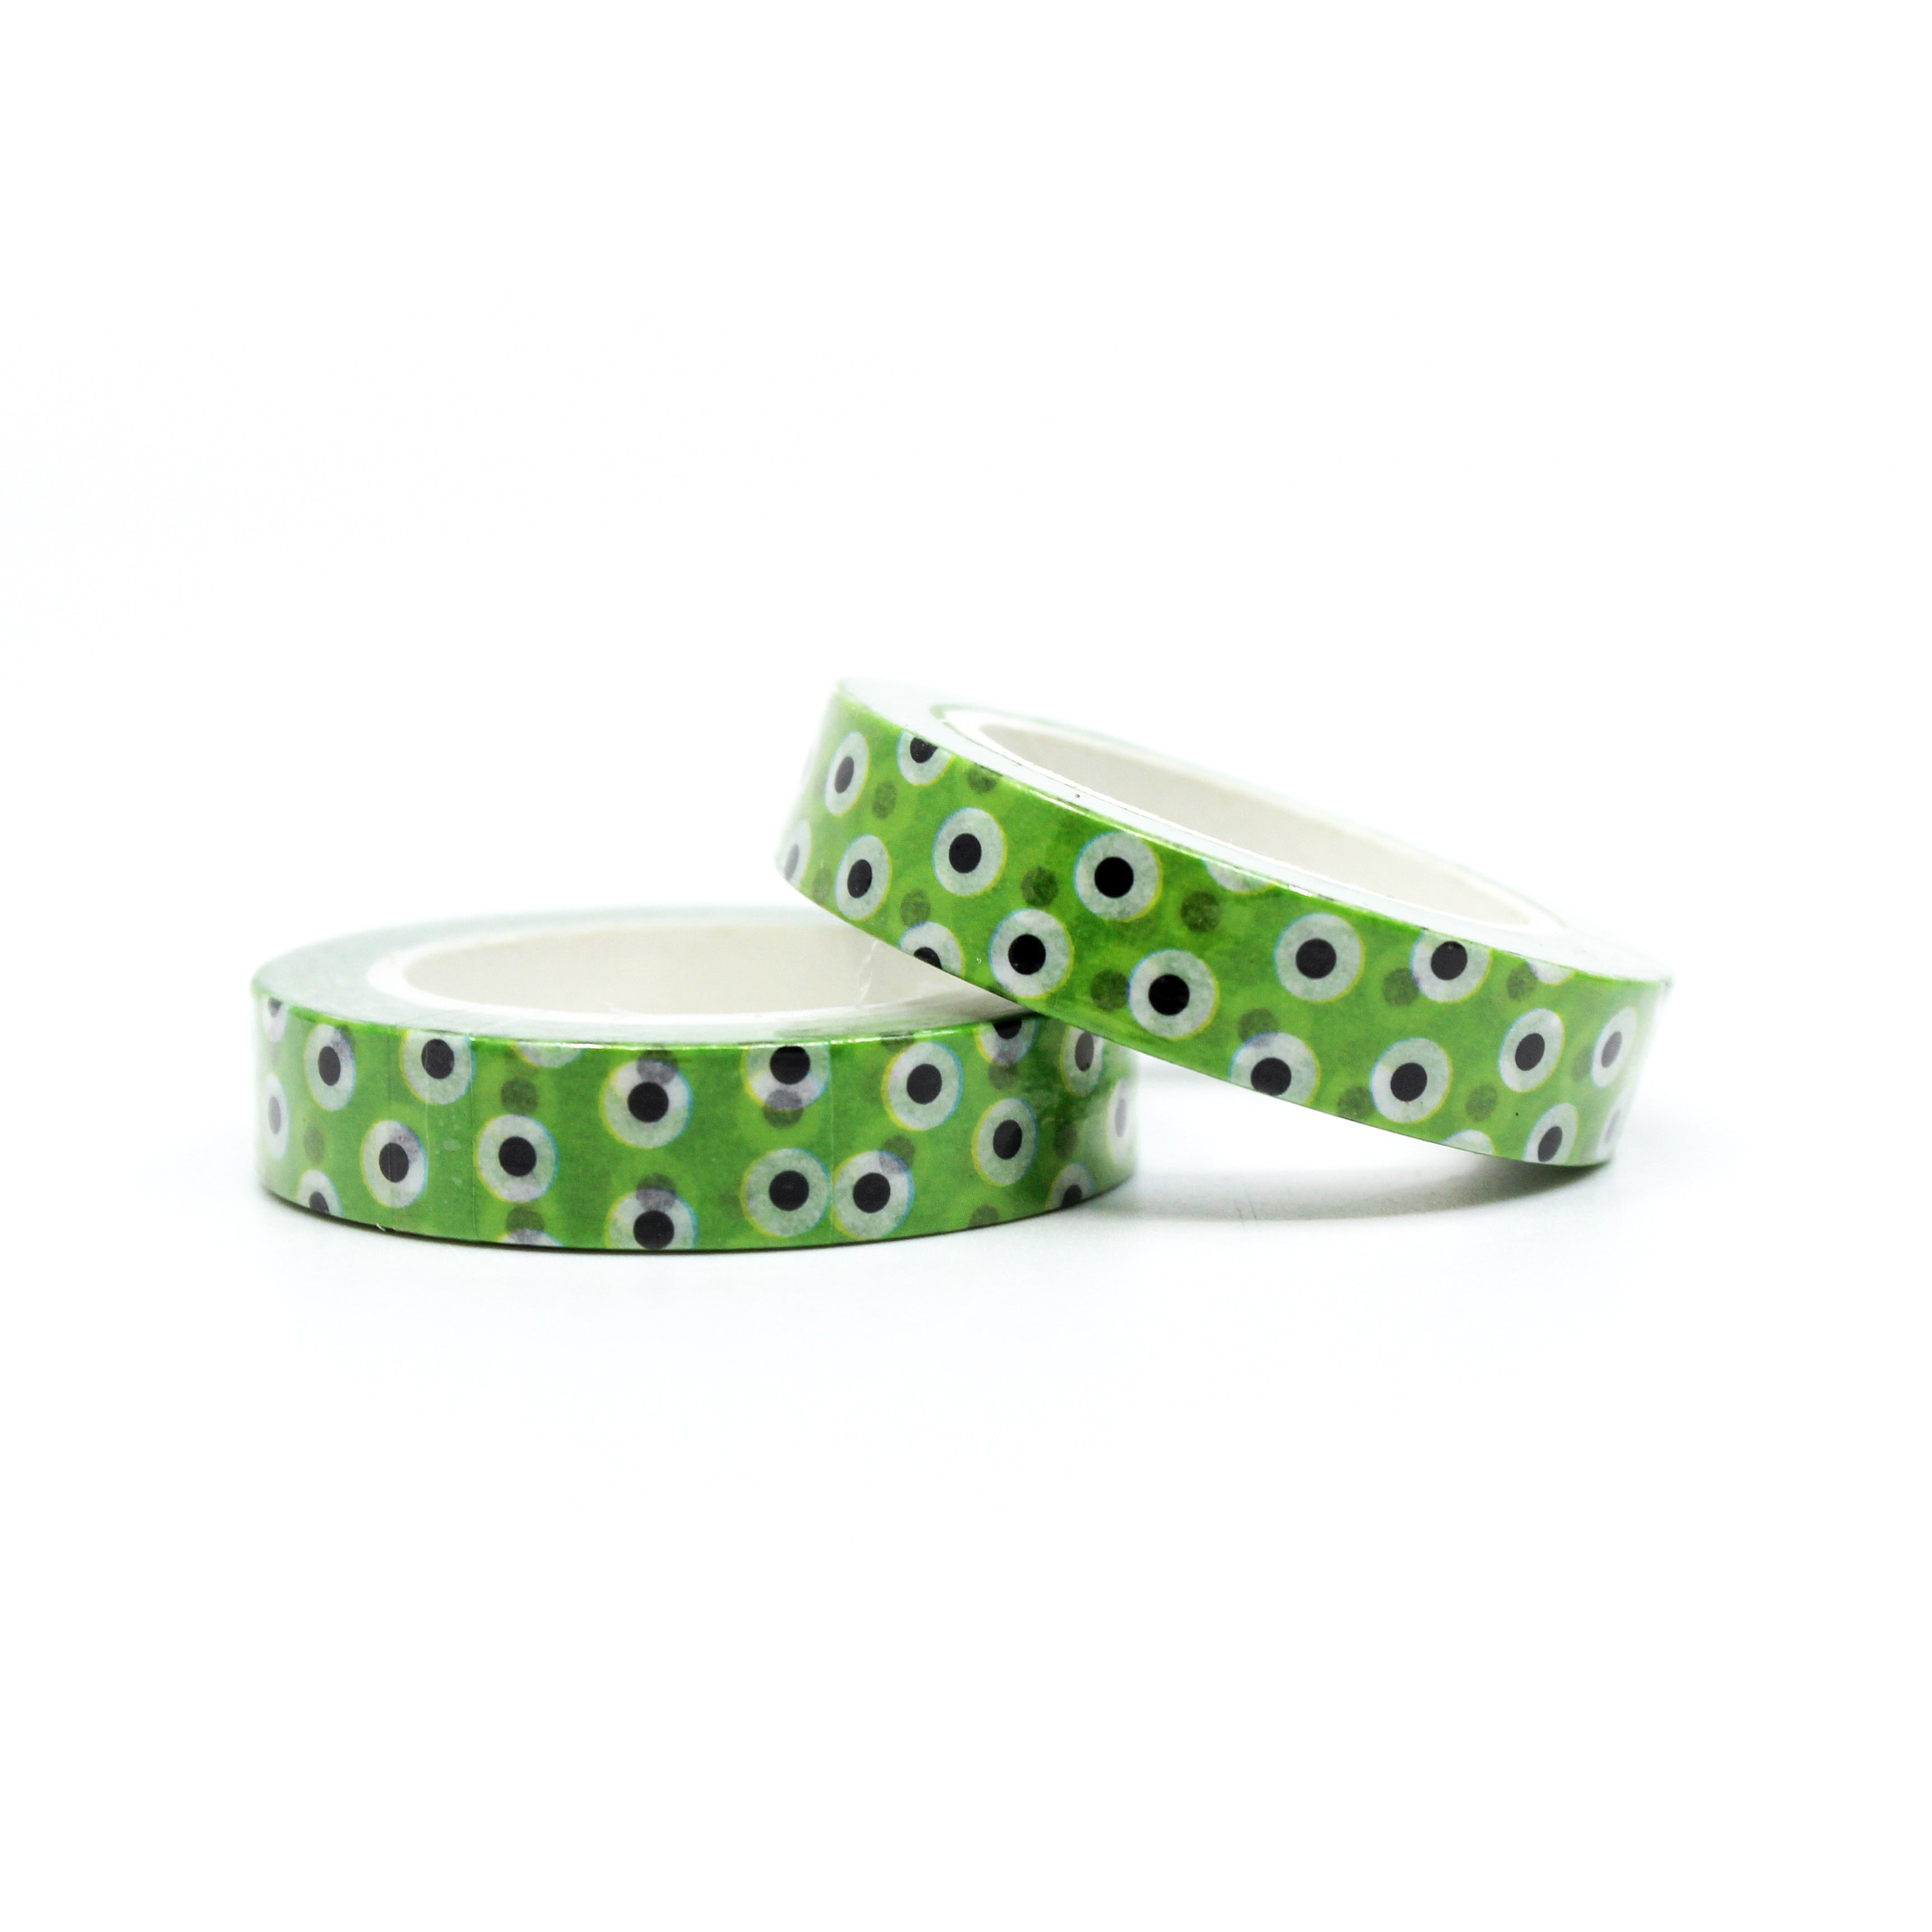 This is a roll of green eyes of the monster washi tapes from BBB Supplies Craft Shop